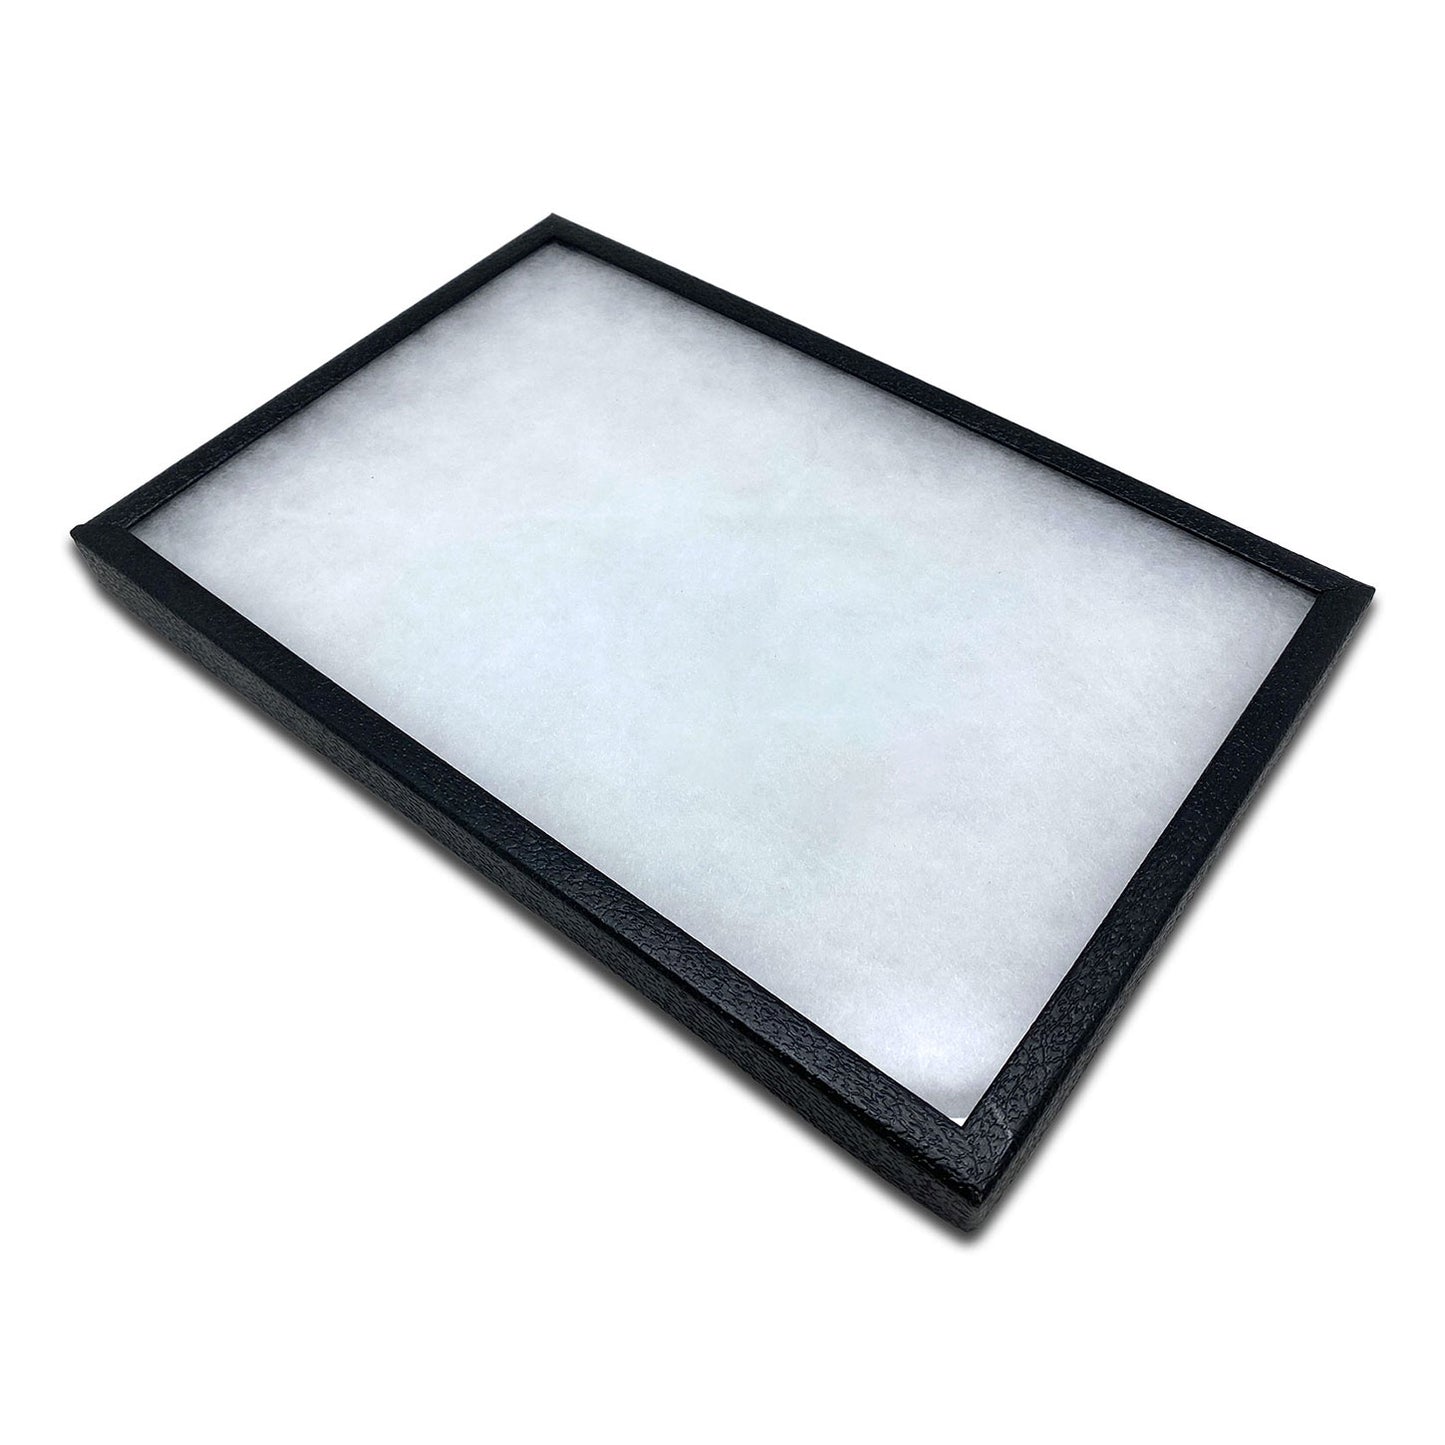 16" x 12" x 1" Black Glass Top Gem Tray with Poly-Fill Wadding